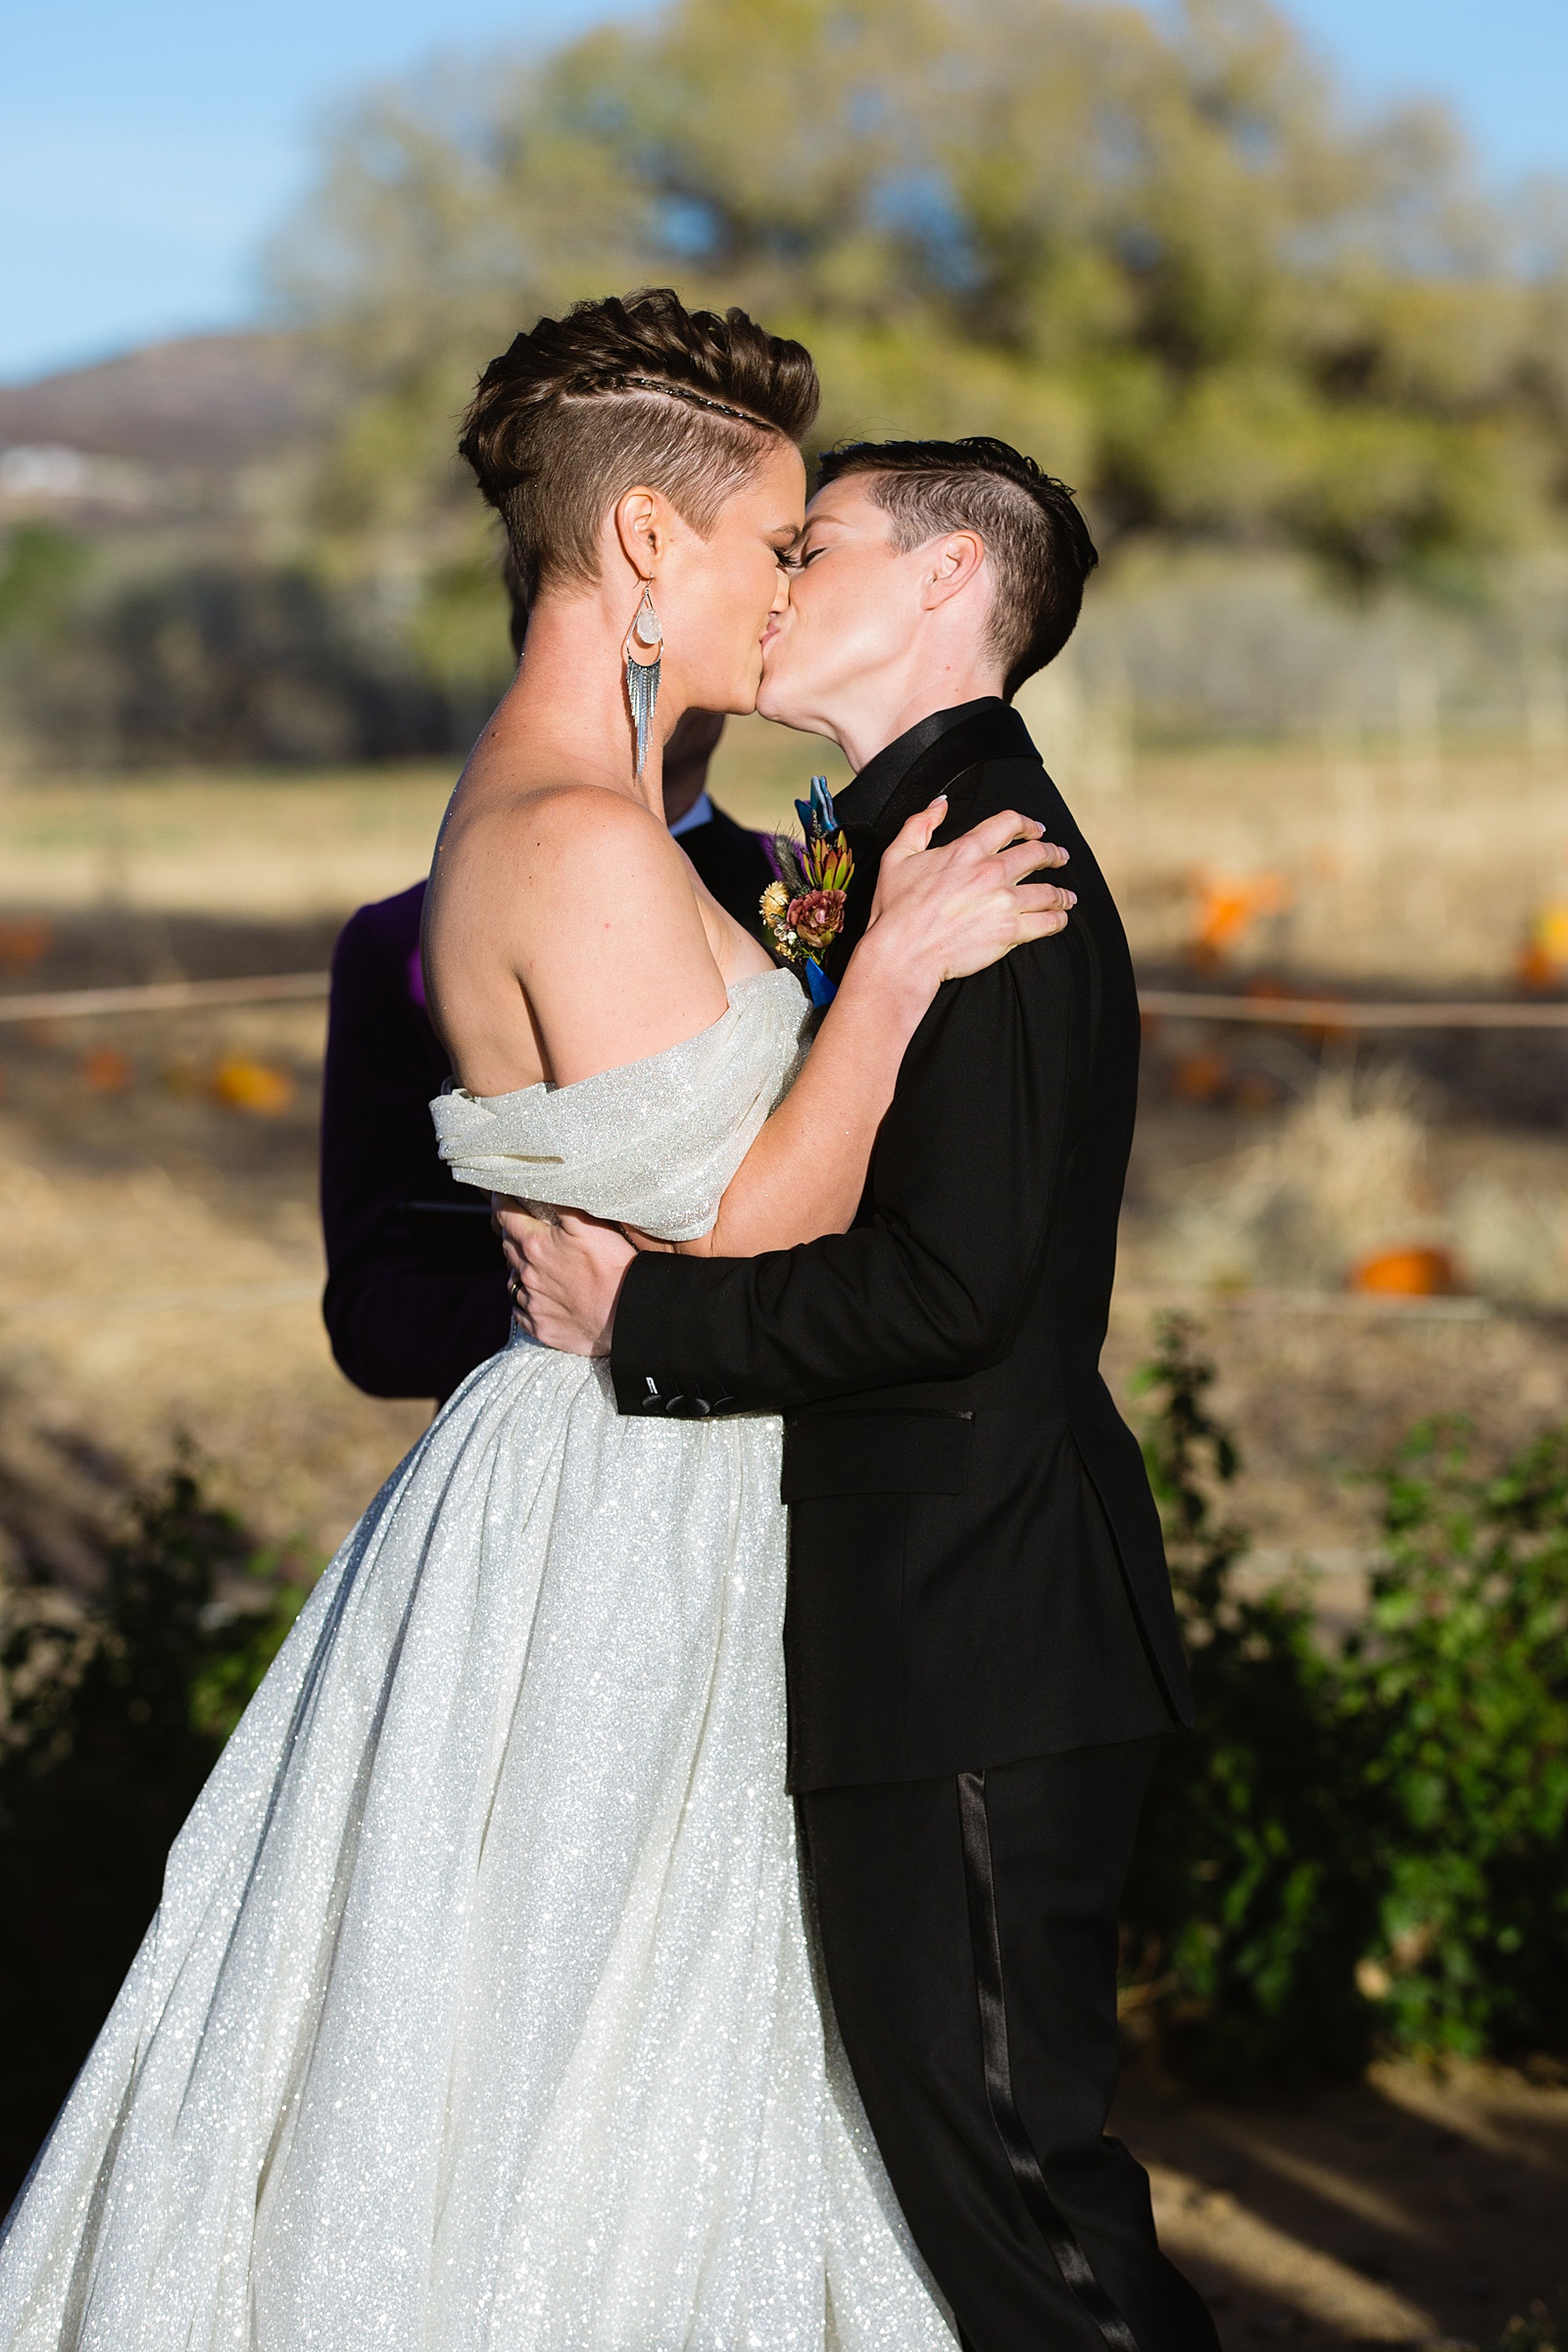 Same sex couple share their first kiss during their wedding ceremony at Mortimer Farms by Arizona wedding photographer PMA Photography.